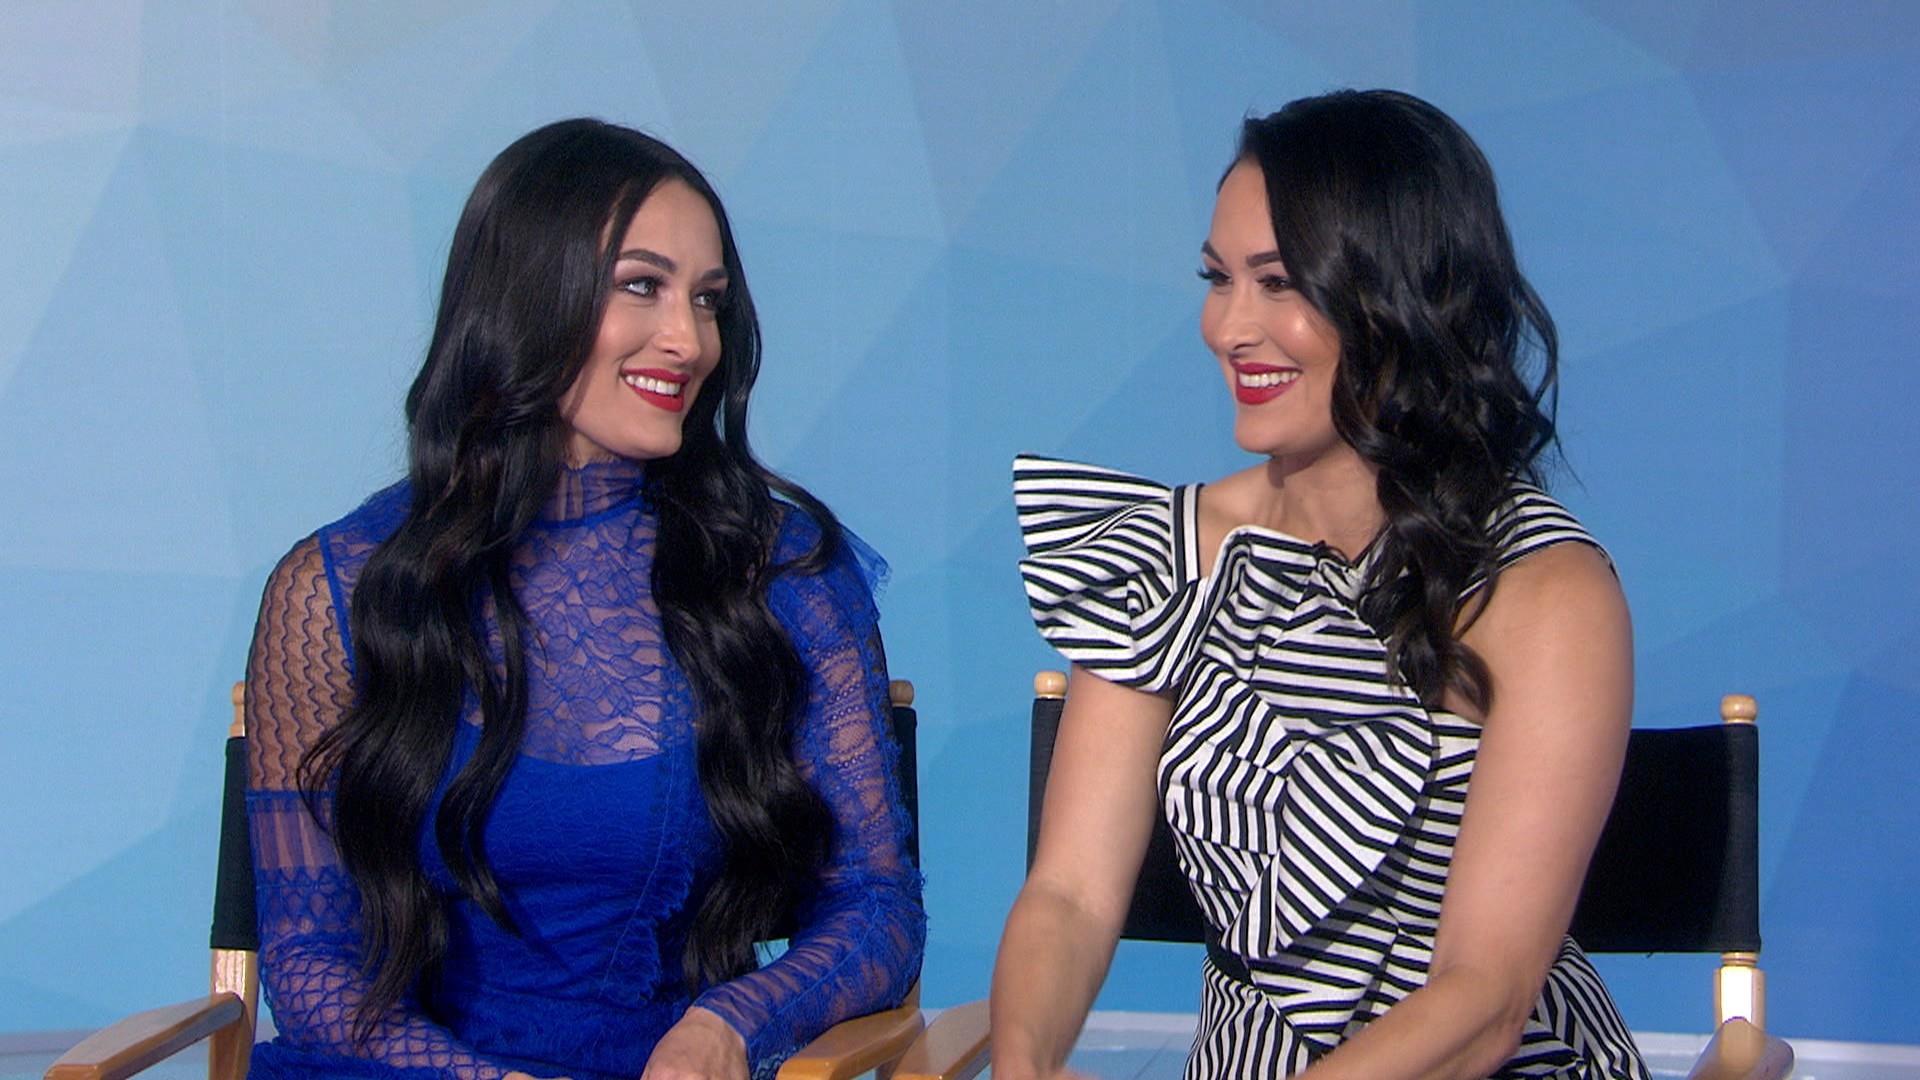 ‘Total Bellas’ Brie and Nikki Bella talk about John Cena and their show - TODAY.com